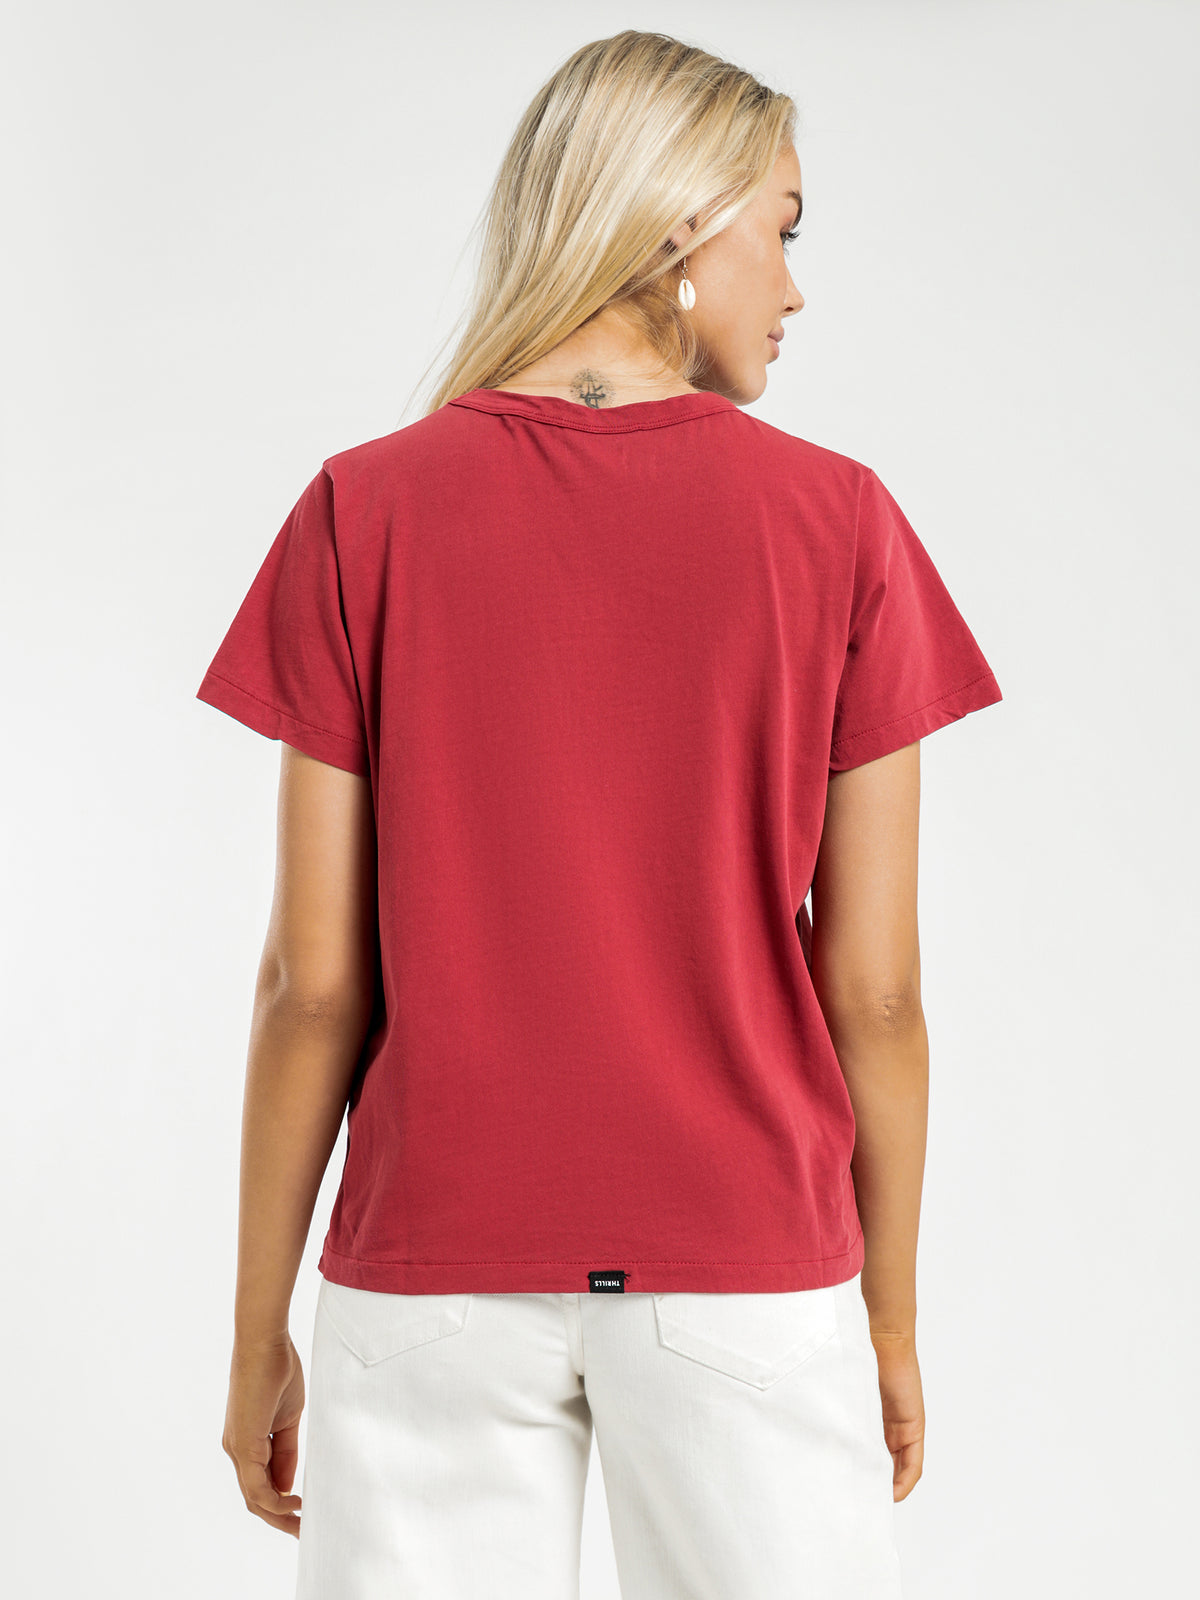 Palm Of Thrills Relaxed T-Shirt in Red